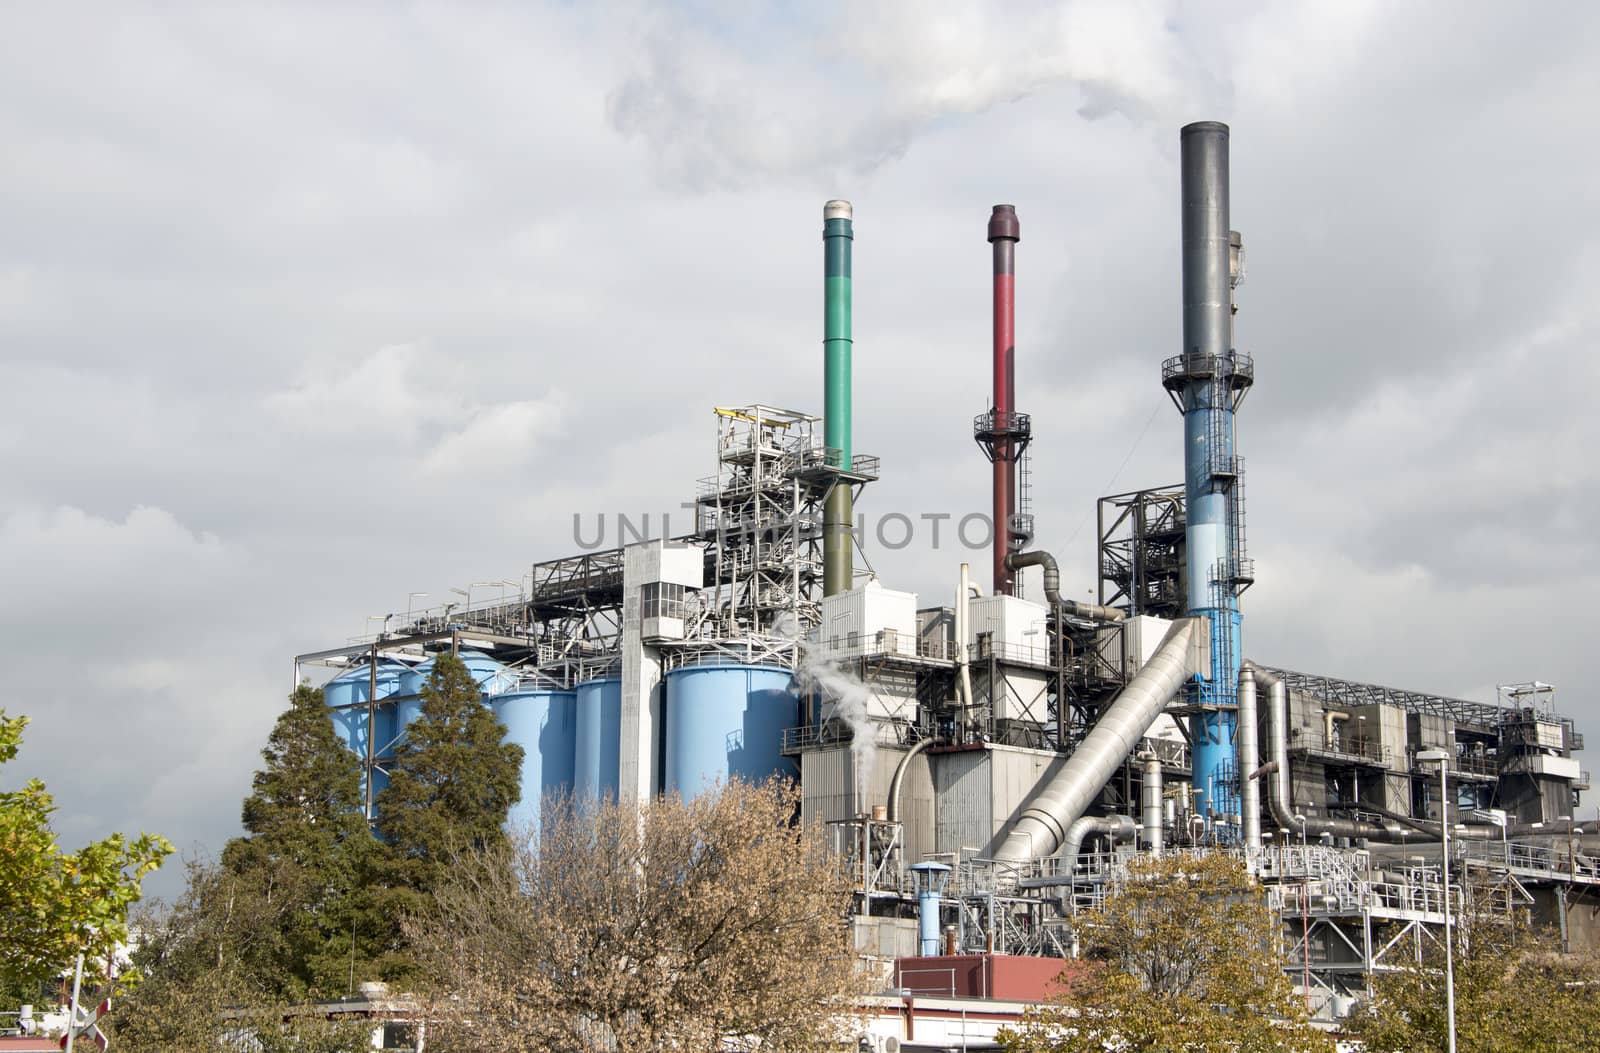 refinery in europoort Netherlands by compuinfoto